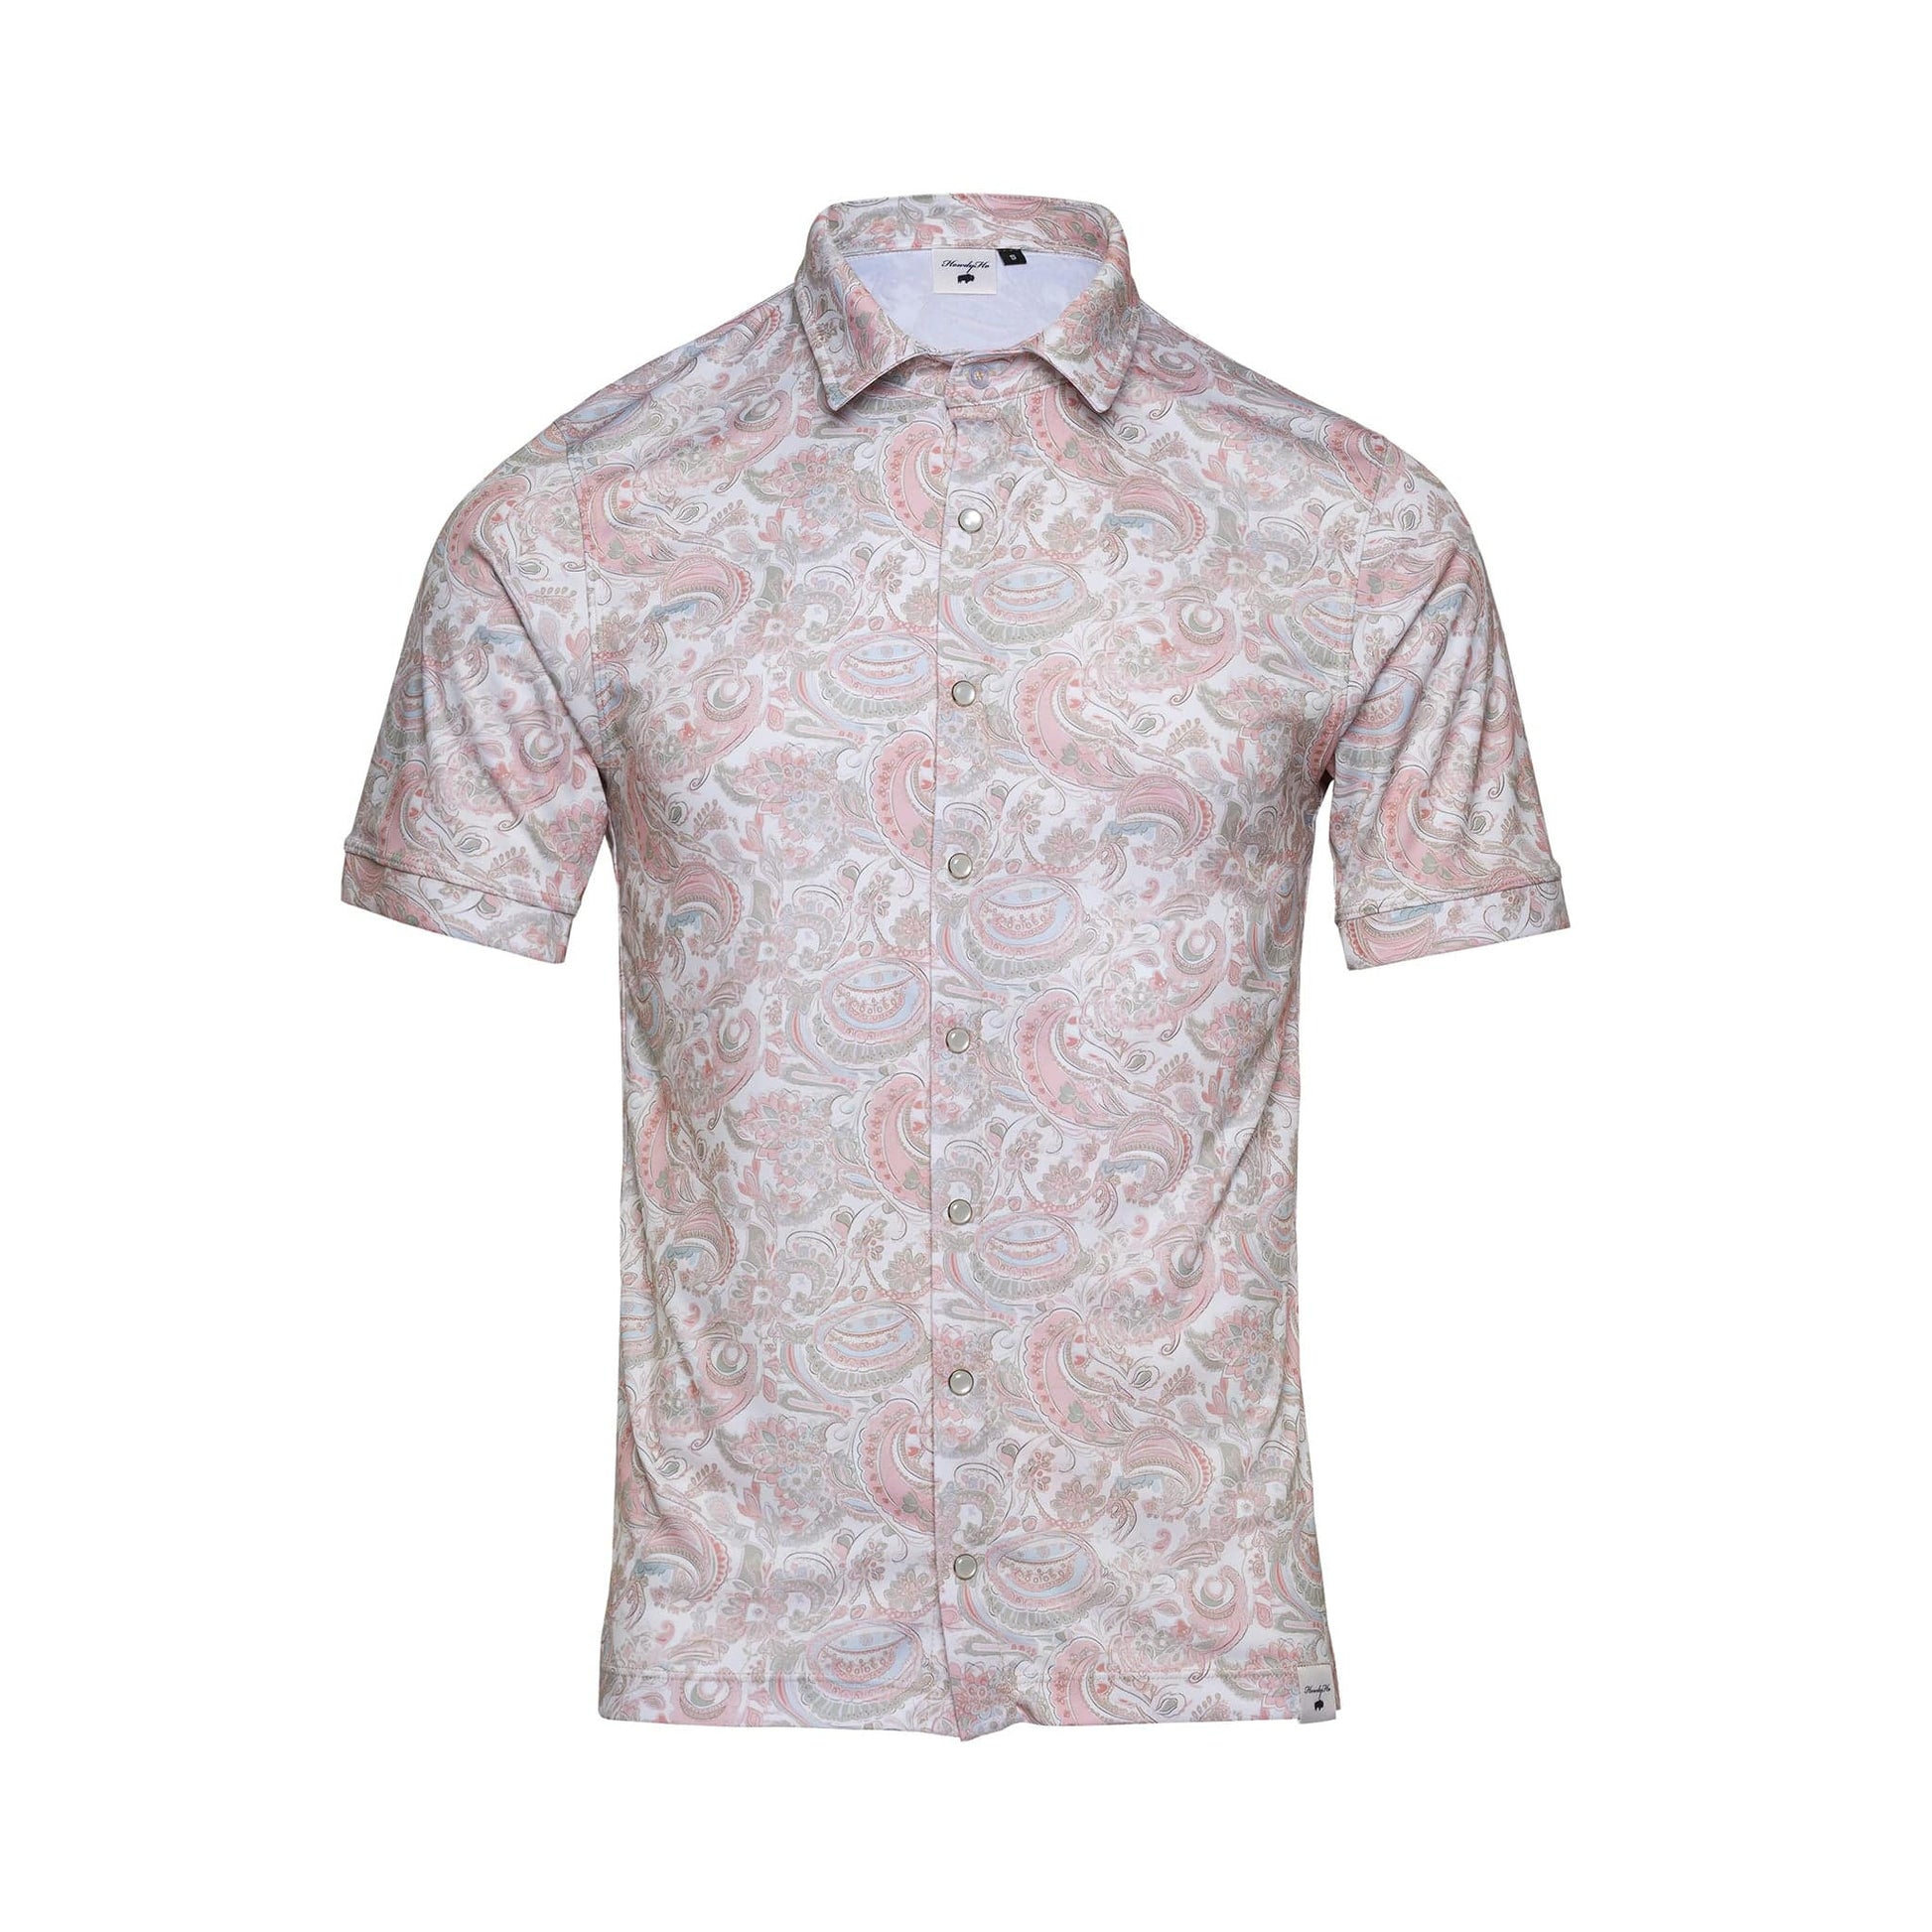 This is a product image of the 'Green Love Paisley' shirt available on howdy-ho.com. The short-sleeved shirt boasts an intricate paisley pattern in soft shades of green and pink on a light background. It features a classic collar and a full-length button placket. The shirt is displayed on a ghost mannequin to accentuate the tailored fit and fine detail of the pattern, perfect for online shoppers looking for a sophisticated and trendy wardrobe addition.